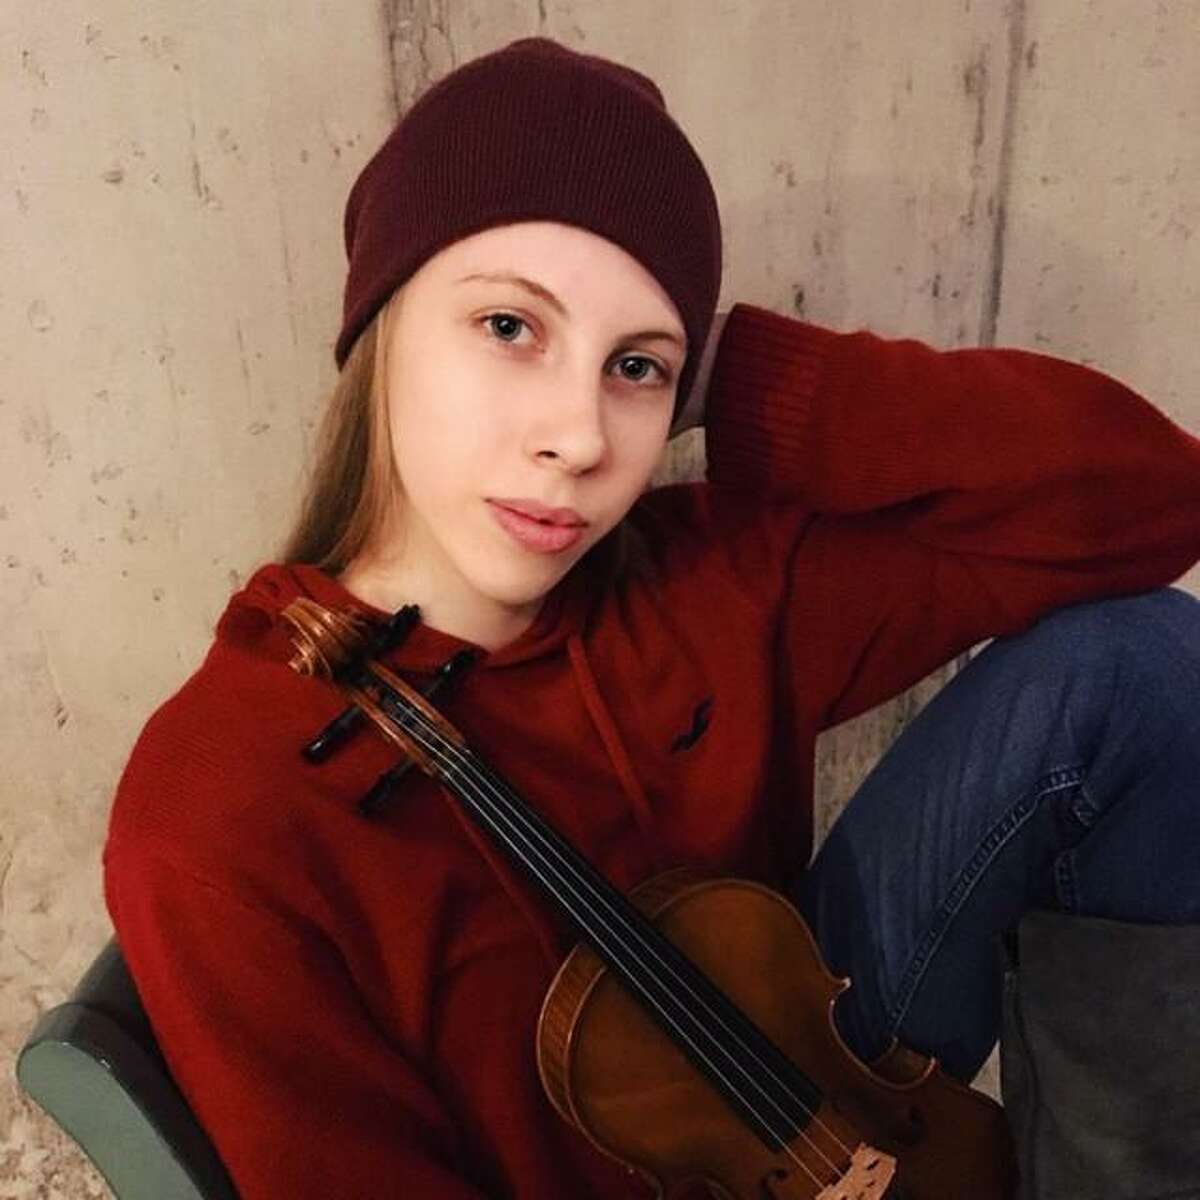 Sanne Zwikker, a 14-year-old Dutch-American violinist from New York City, will give a free solo concert at the Ivoryton Playhouse Sept. 27.